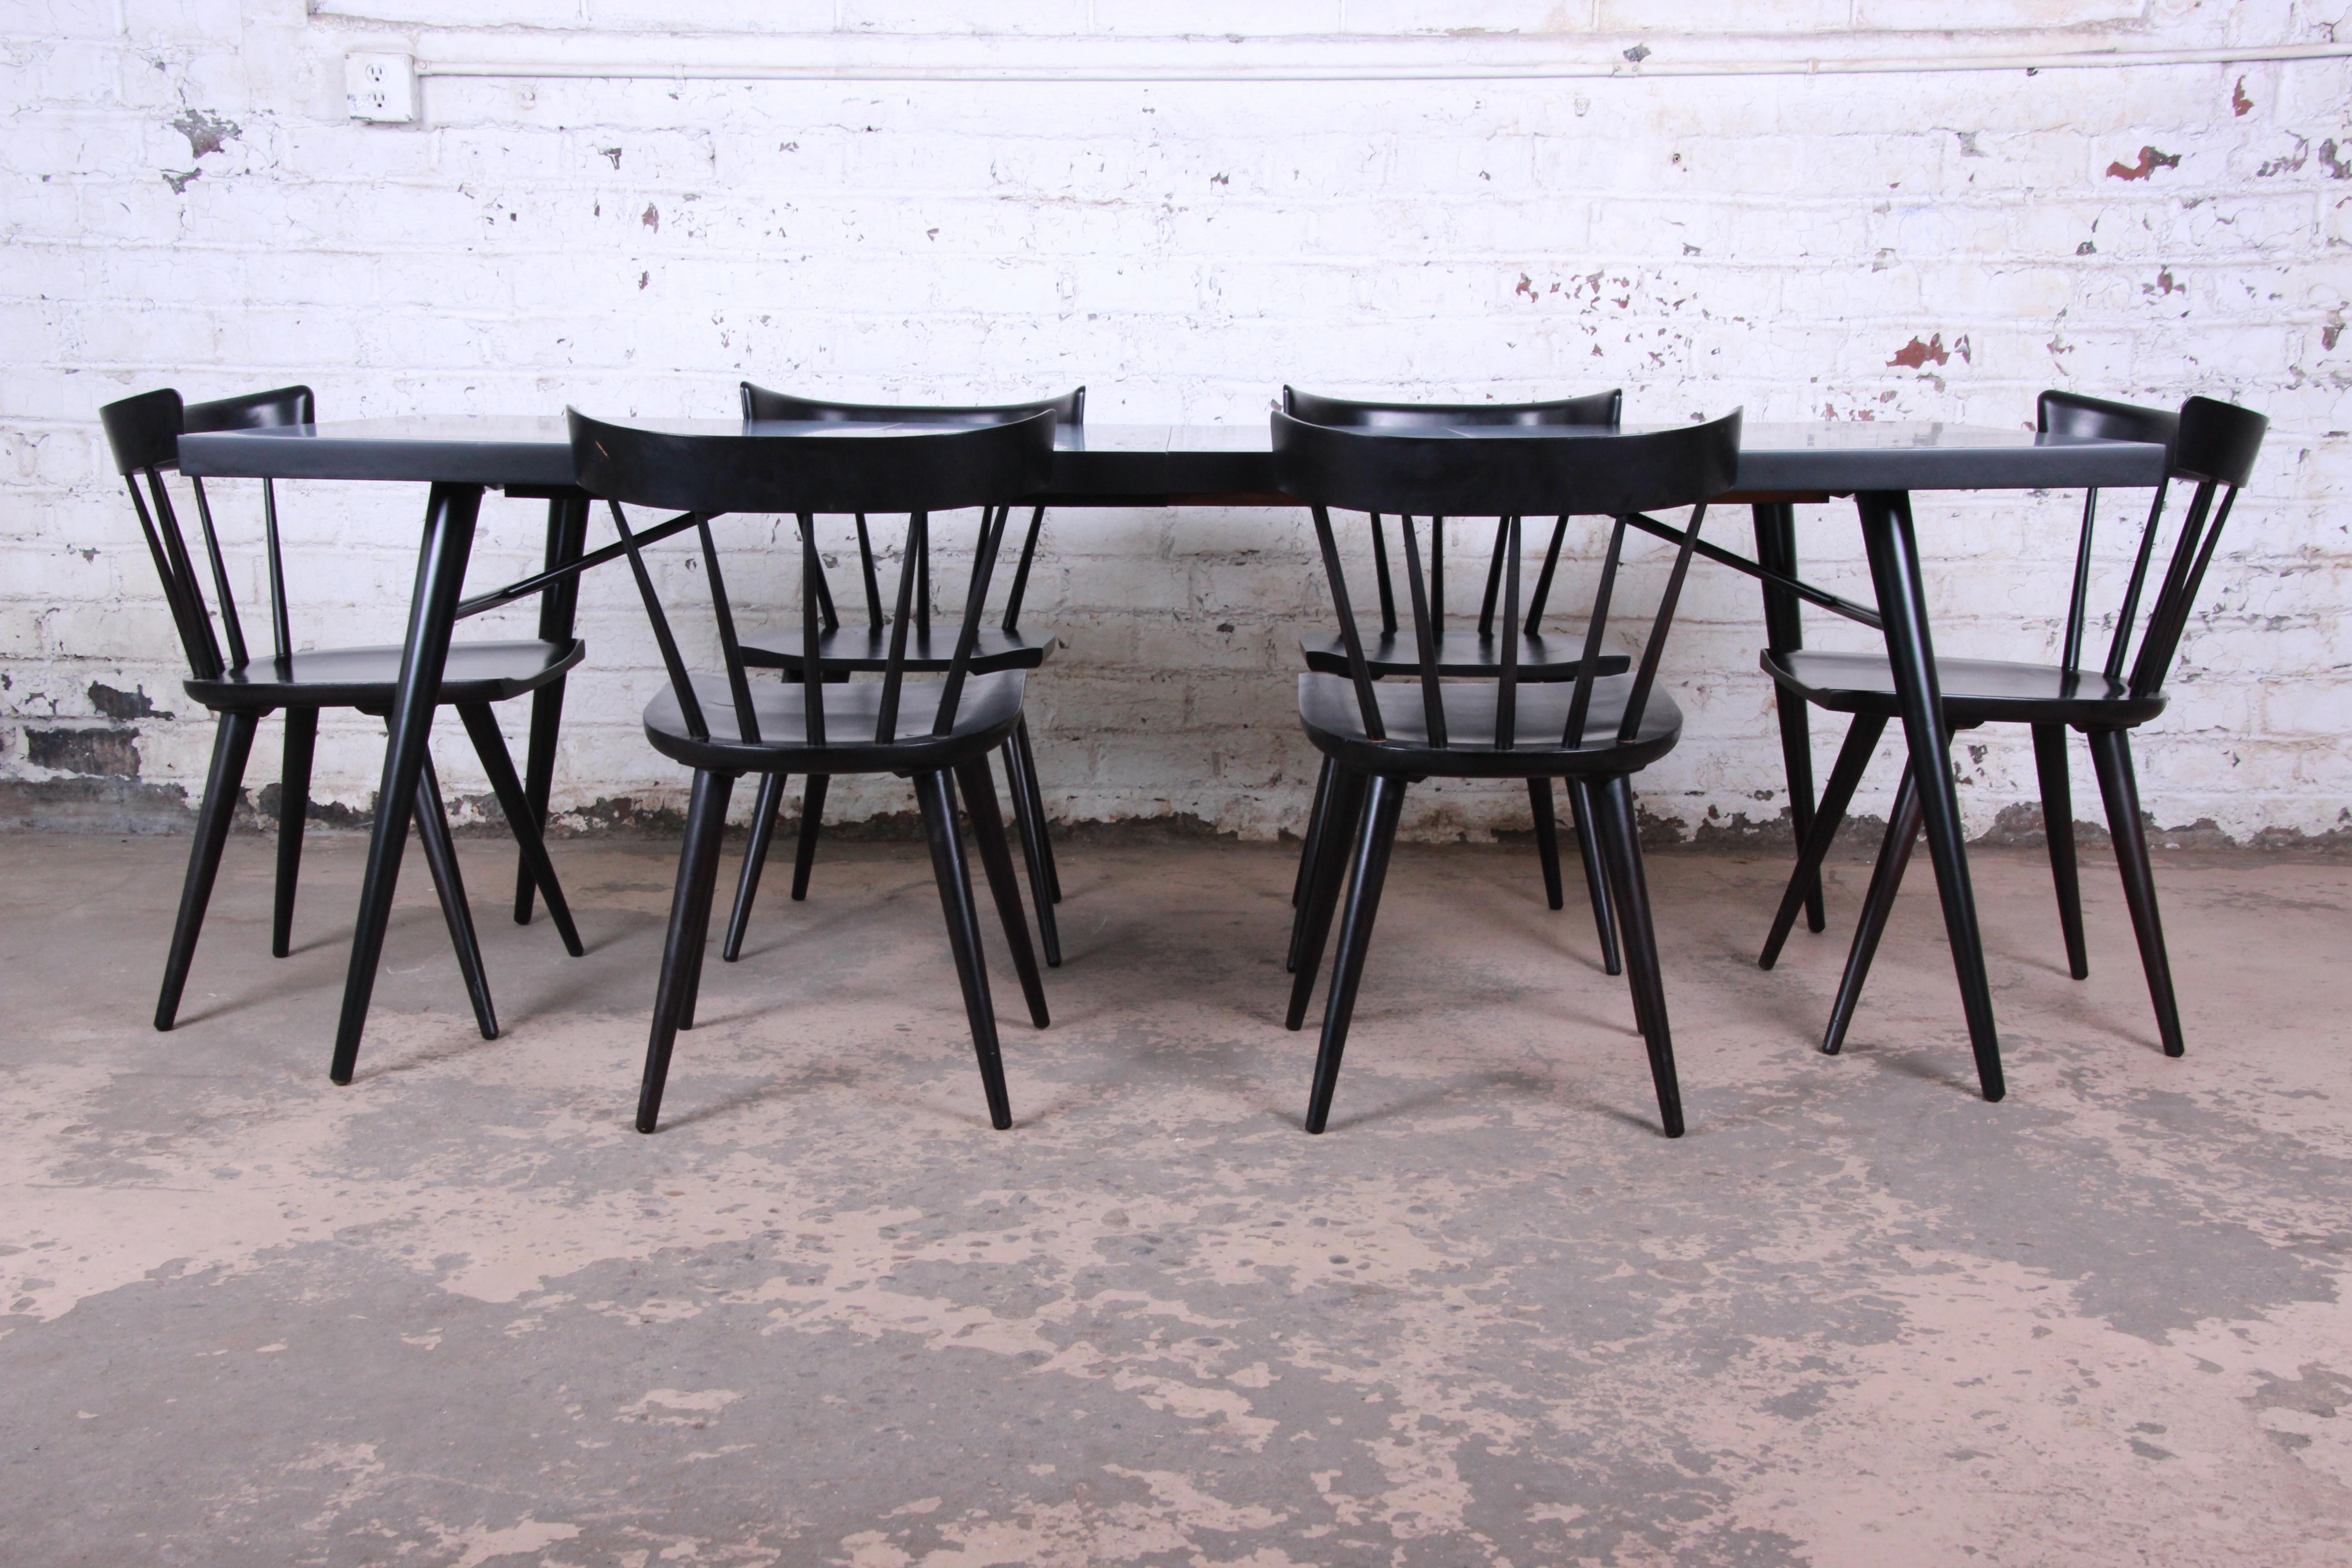 Extension dining table and six chairs. The table extends to 84.13 inches with both of the 15 inch leaves in. The table is newly refinished in a sleep black lacquer. The chairs make this distinct McCobb Mid-Century Modern design and perfect set for